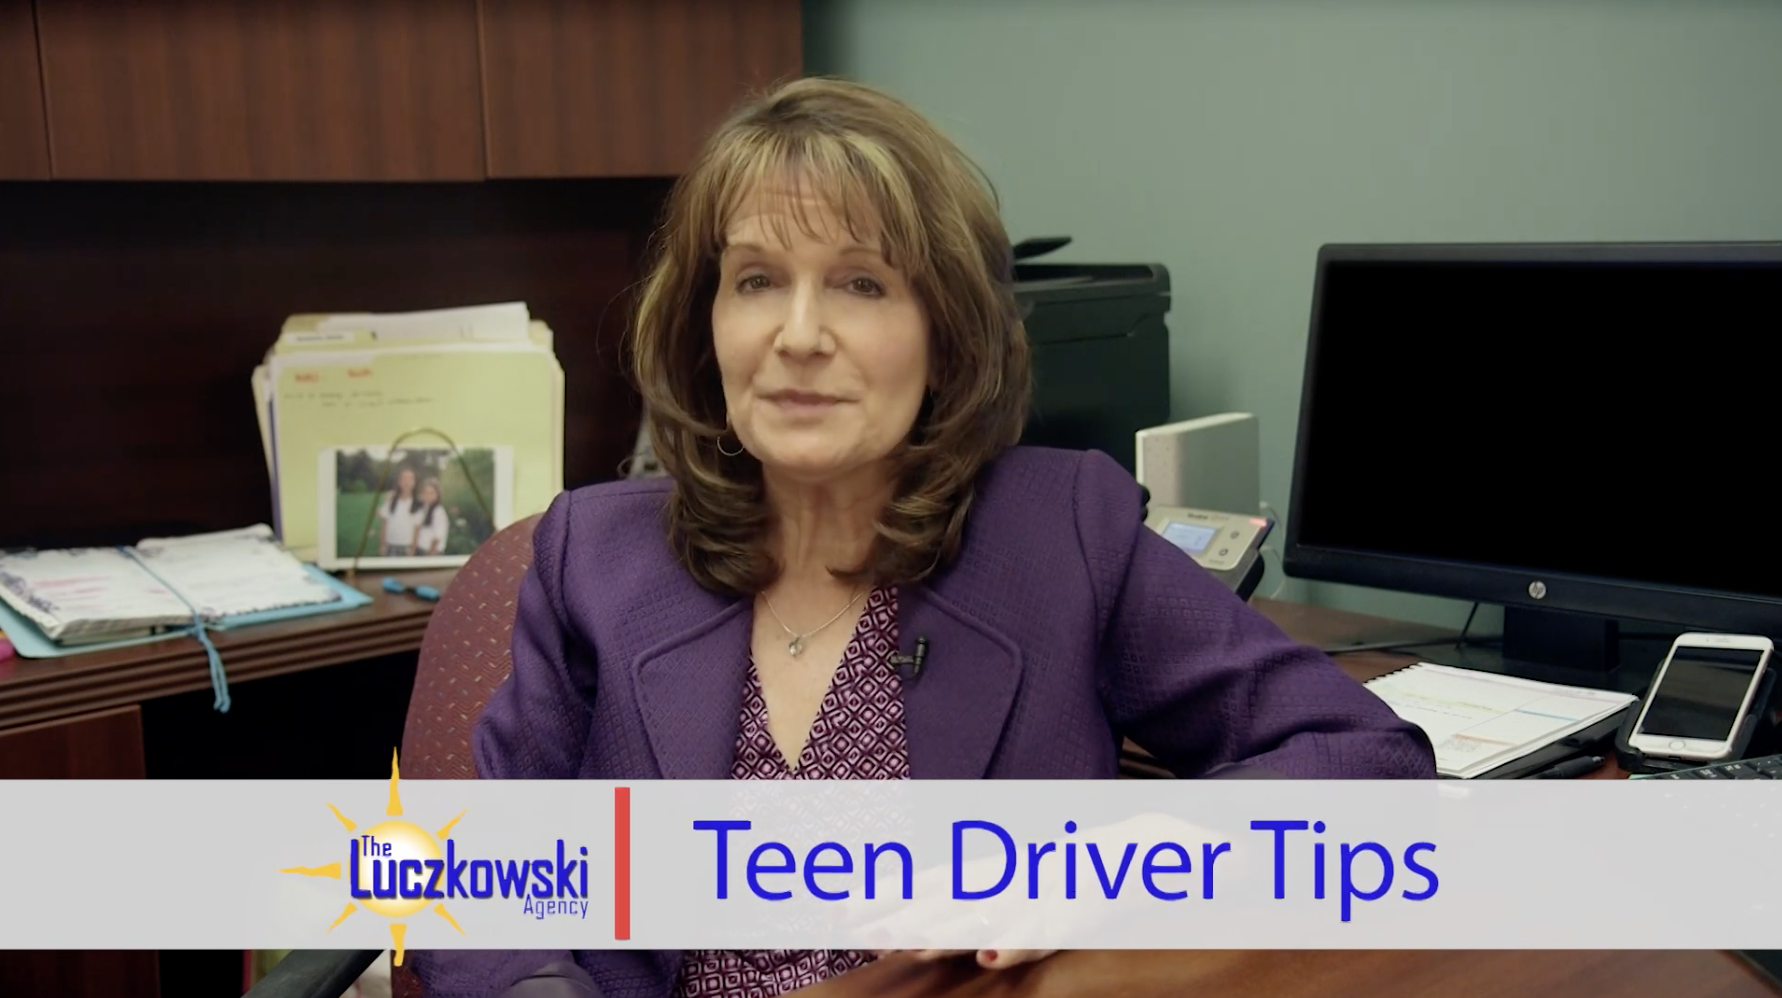 7 Tips for Teen Drivers